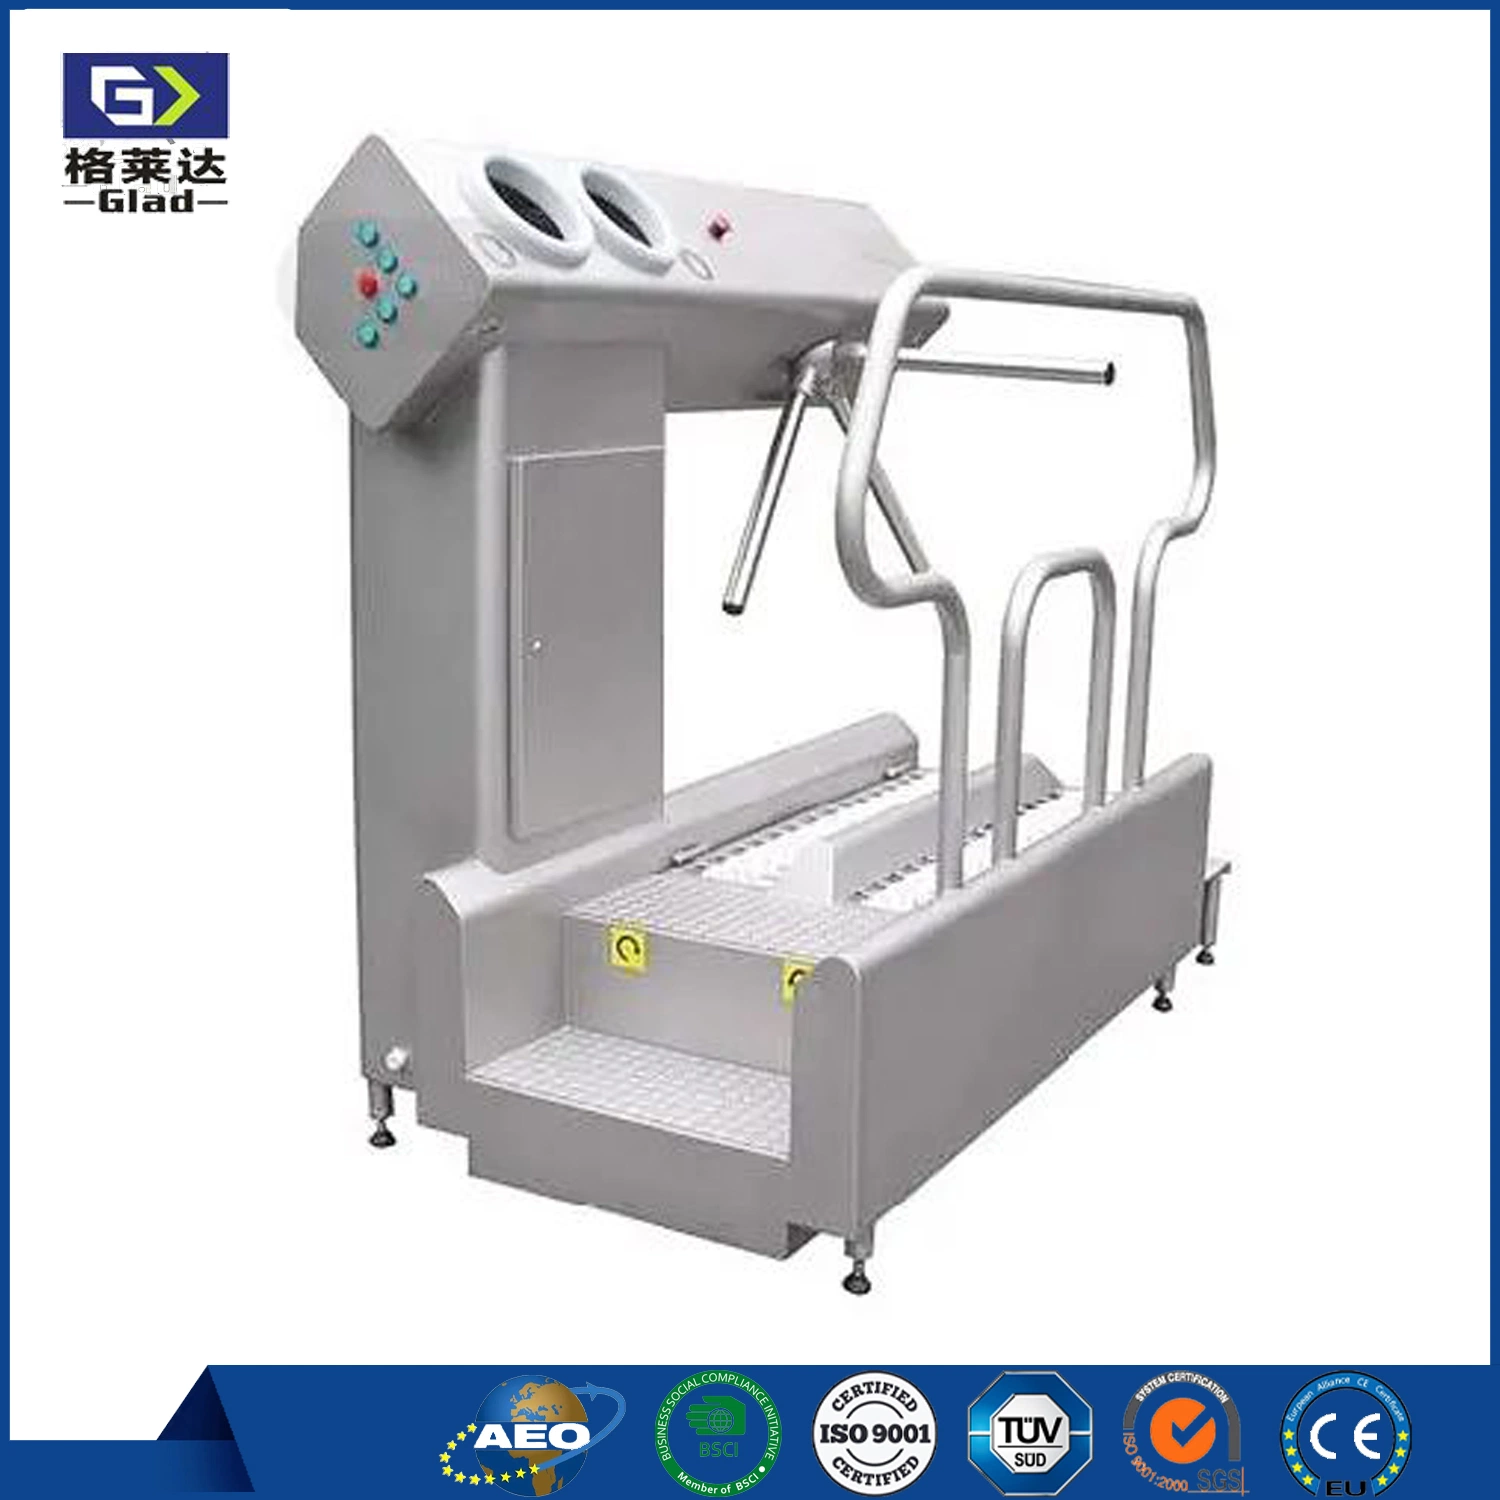 Water Boots Washer Machine Personal Hygiene Stationand Entry Control Devices Automatic Shoe Washing & Disinfection / Hand Washing China Supplier